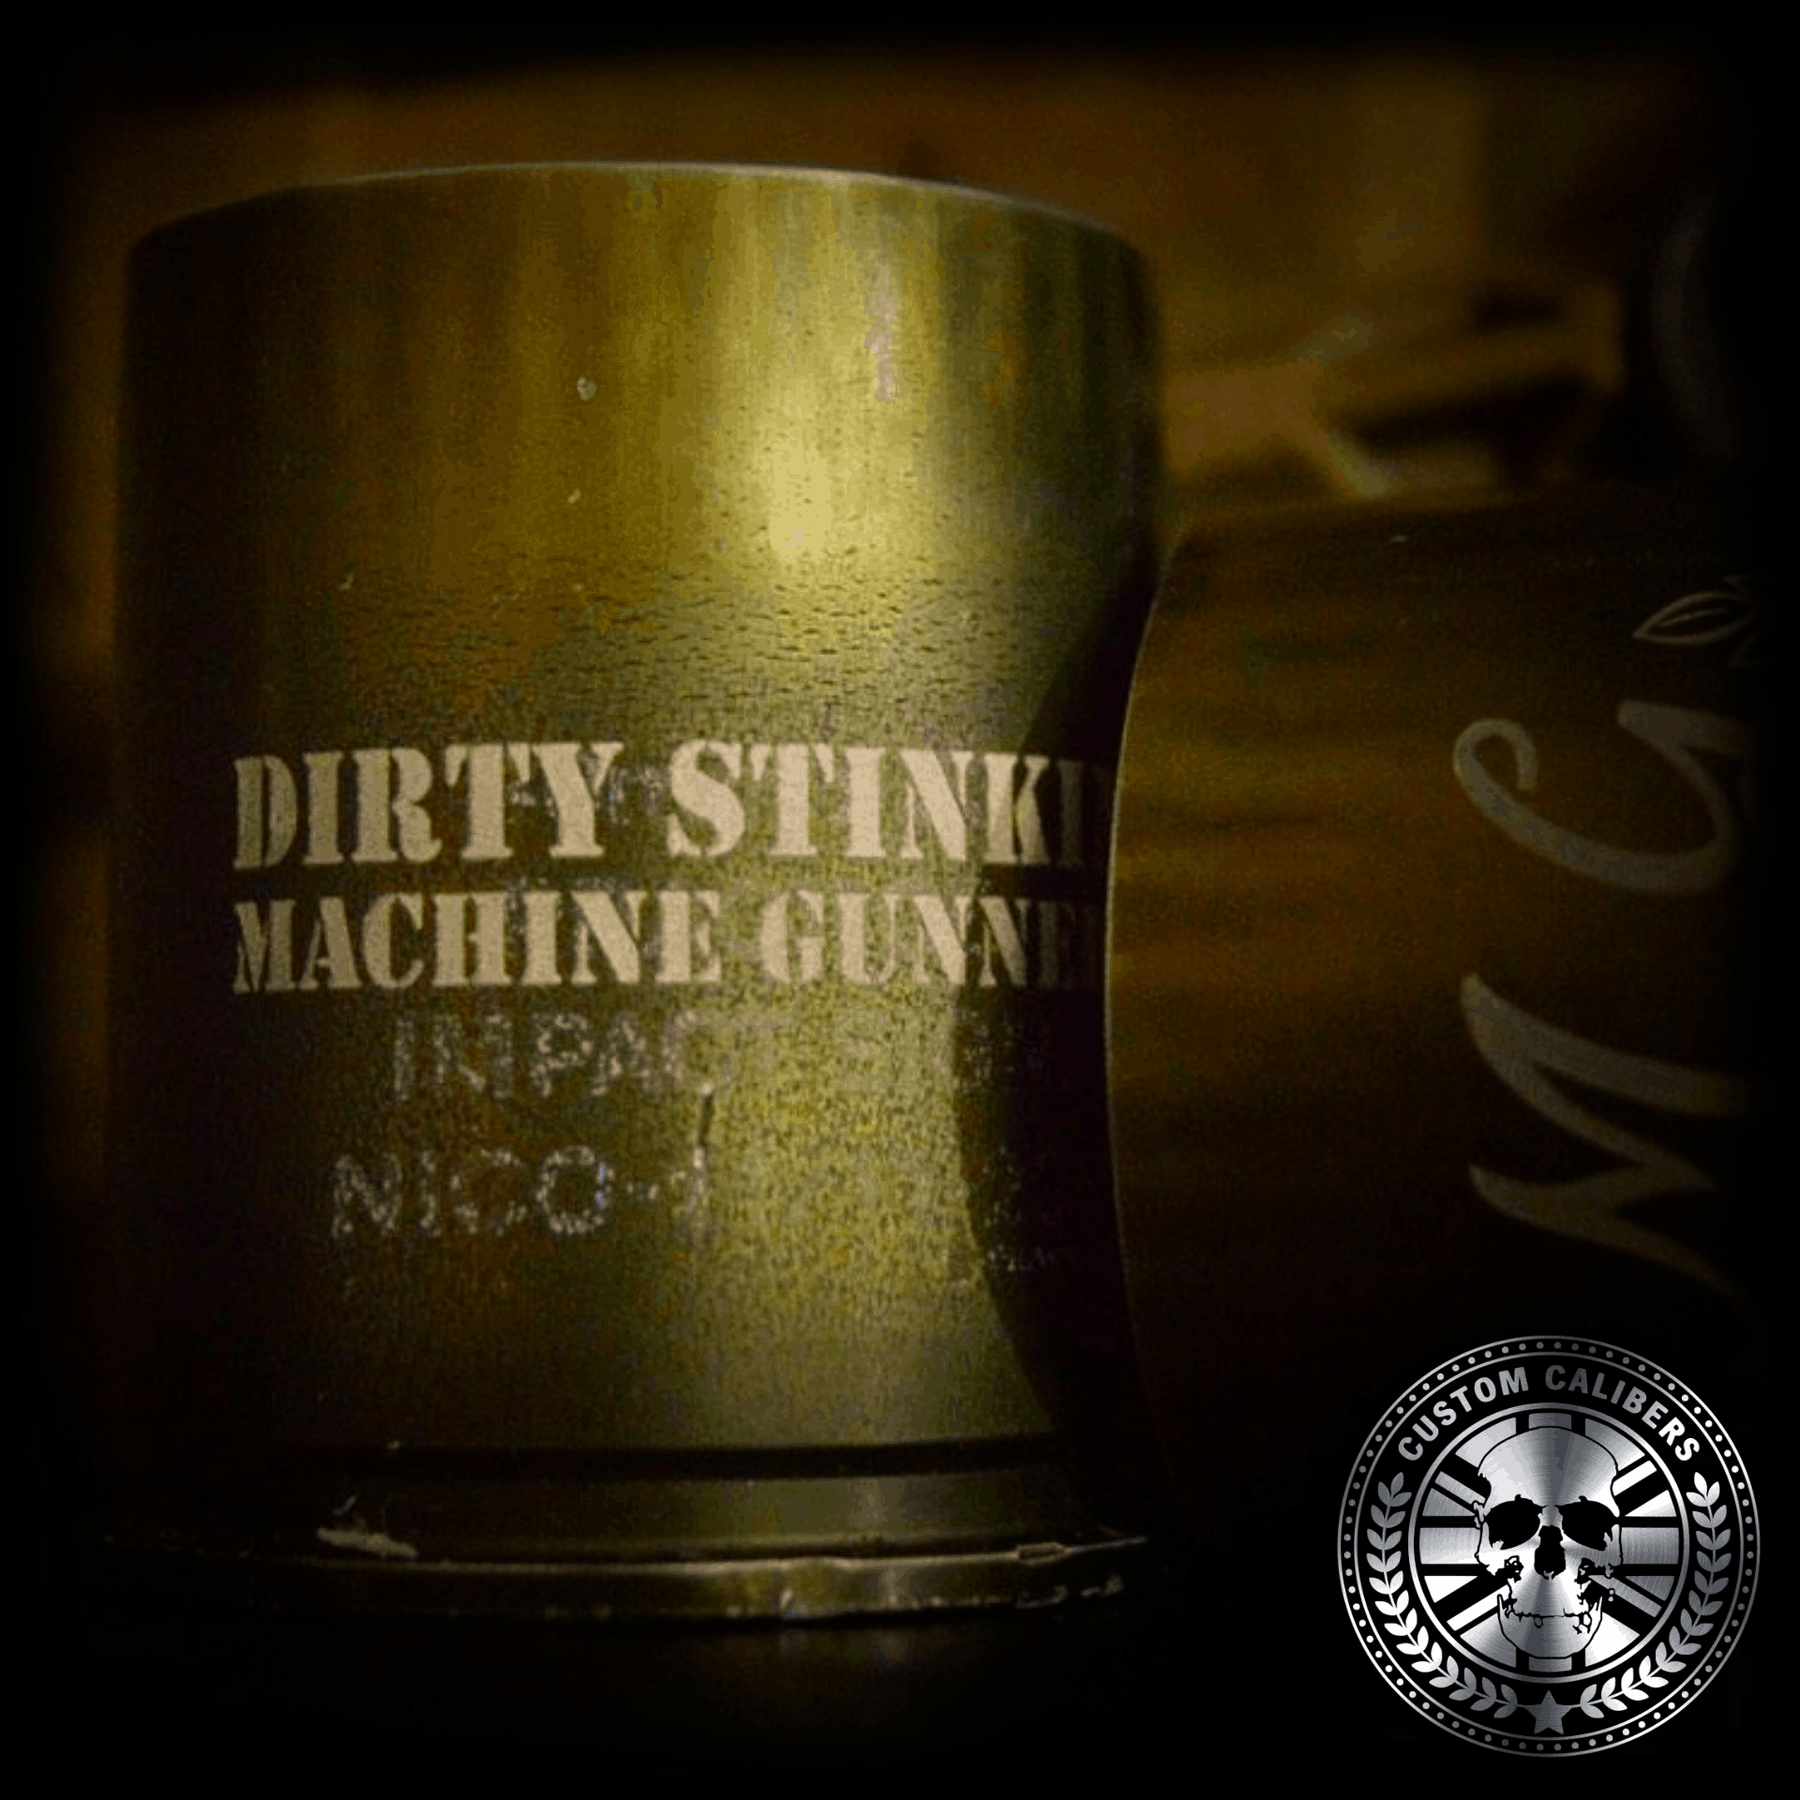 a nice macro shot of one of our battle worn green 40mm GMG grenade shotglasses